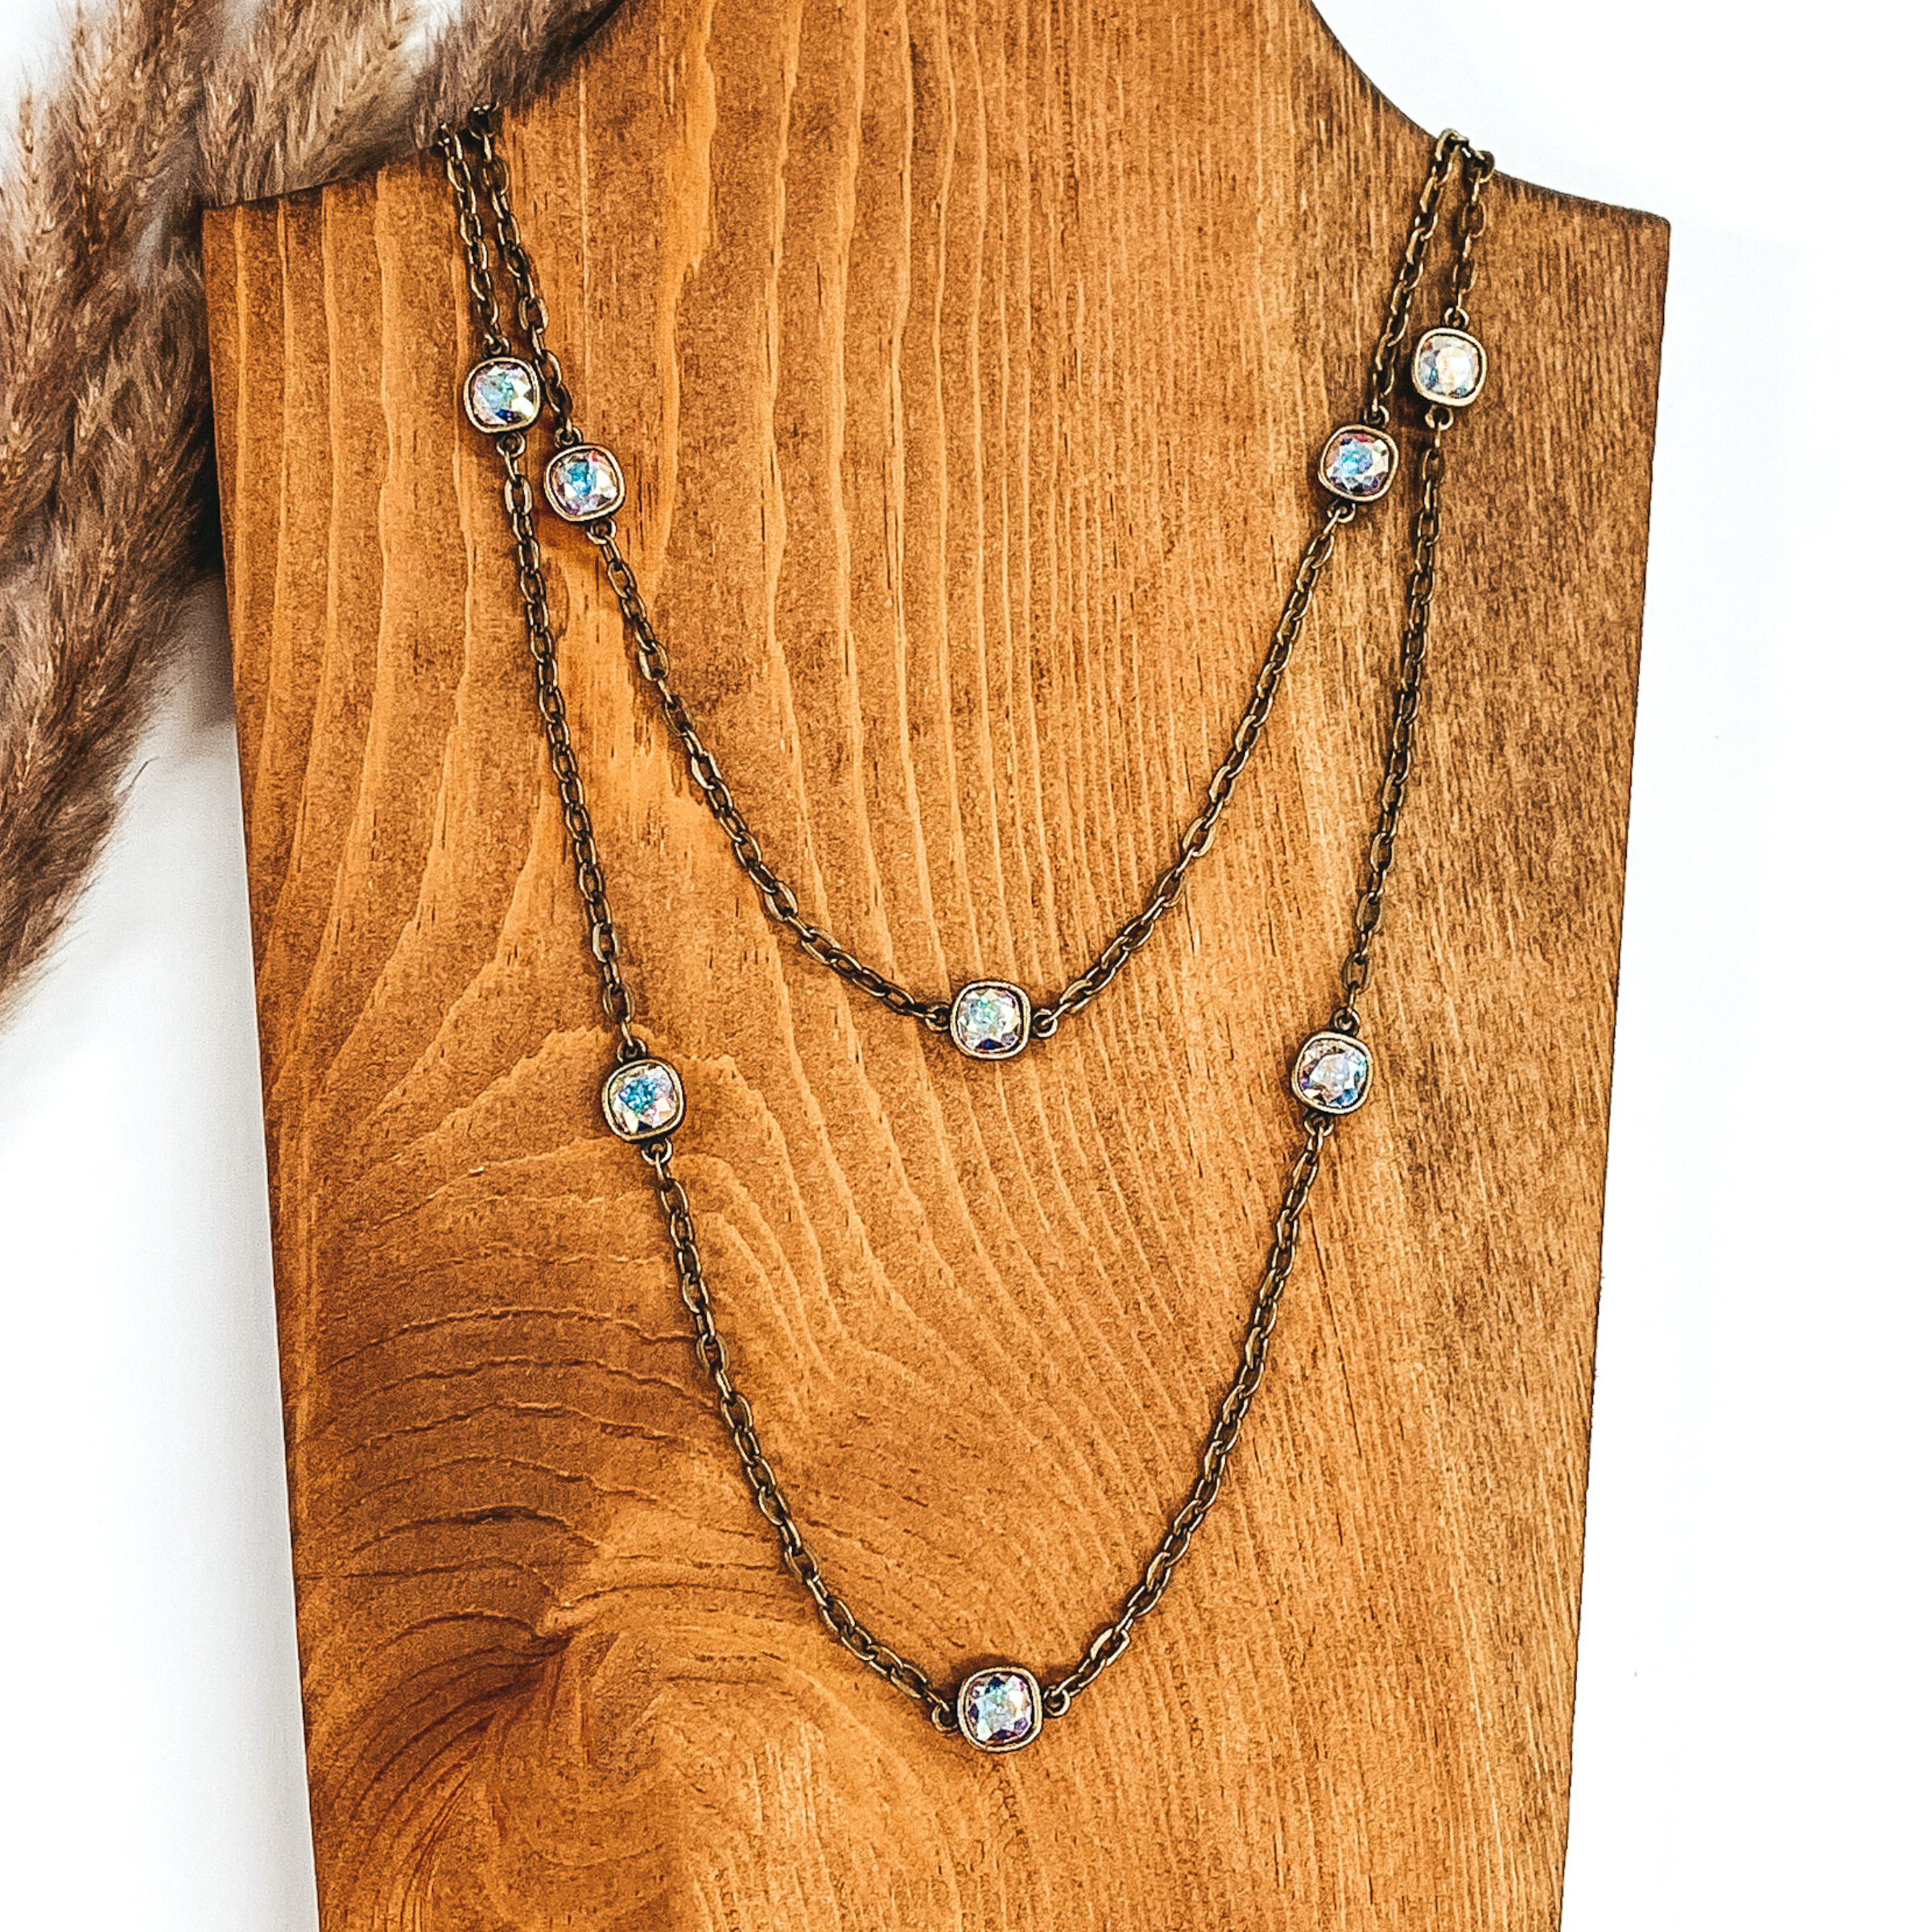 Bronze chain necklace with AB square crystal spacers pictured on a white and wood background. 